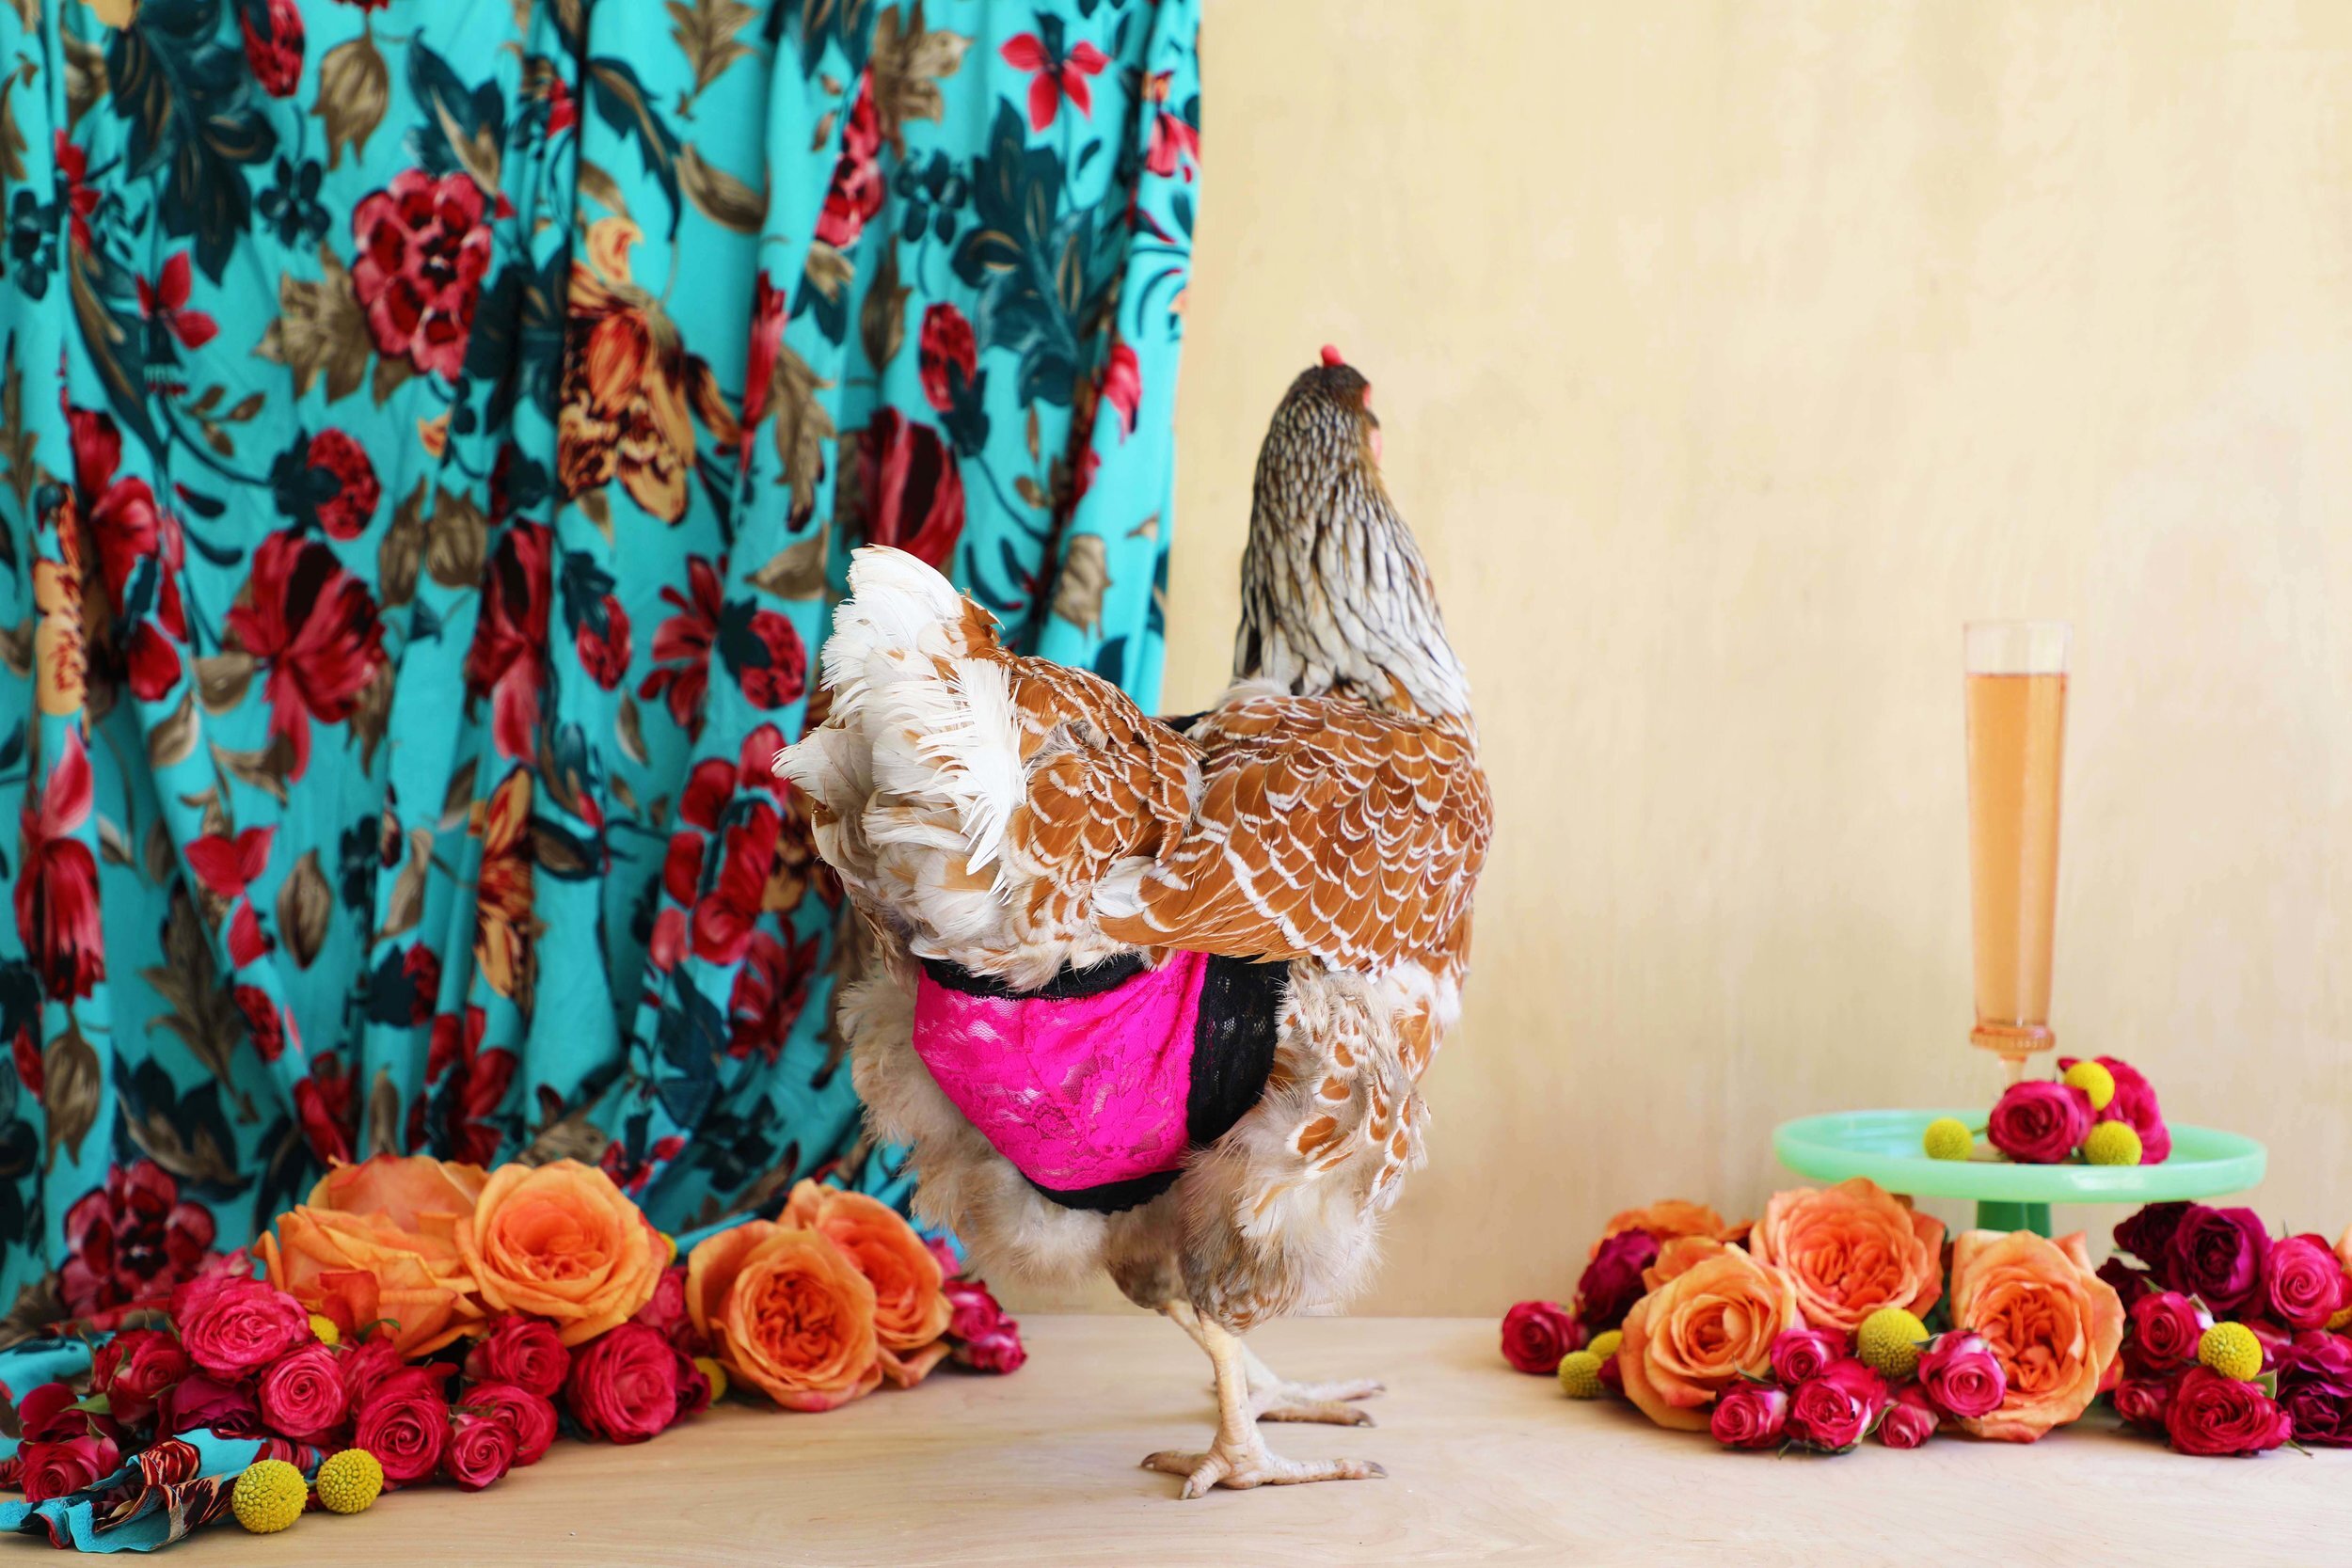 Chicken Lingerie — Drinking With Chickens- Craft cocktail recipes